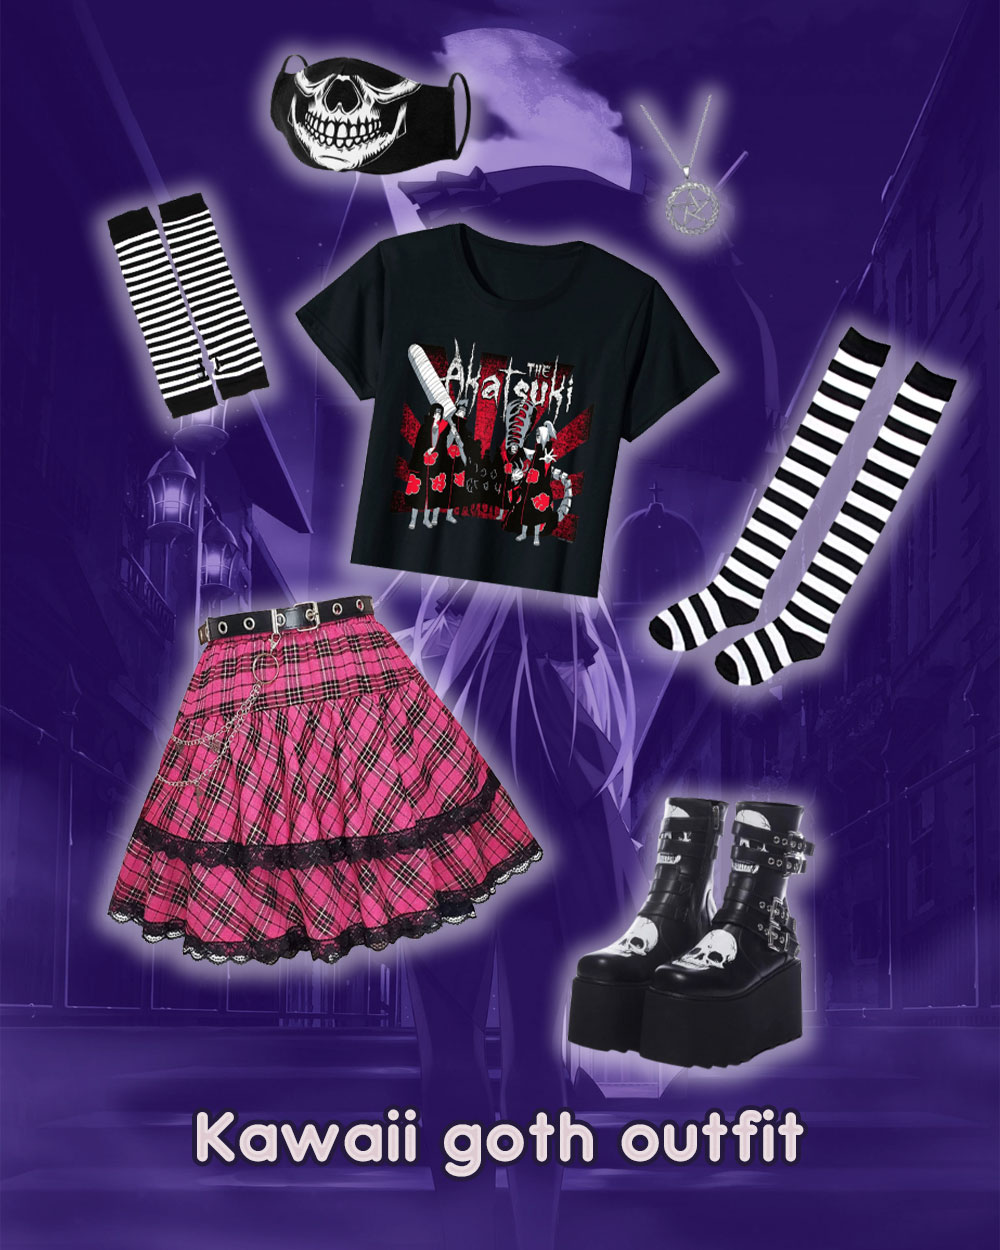 Goth kawaii outfit inspiration - mini plaid skirt, platform boots, striped high socks, striped fingerless gloves, skull face mask, black baby tee, and gothic accessories